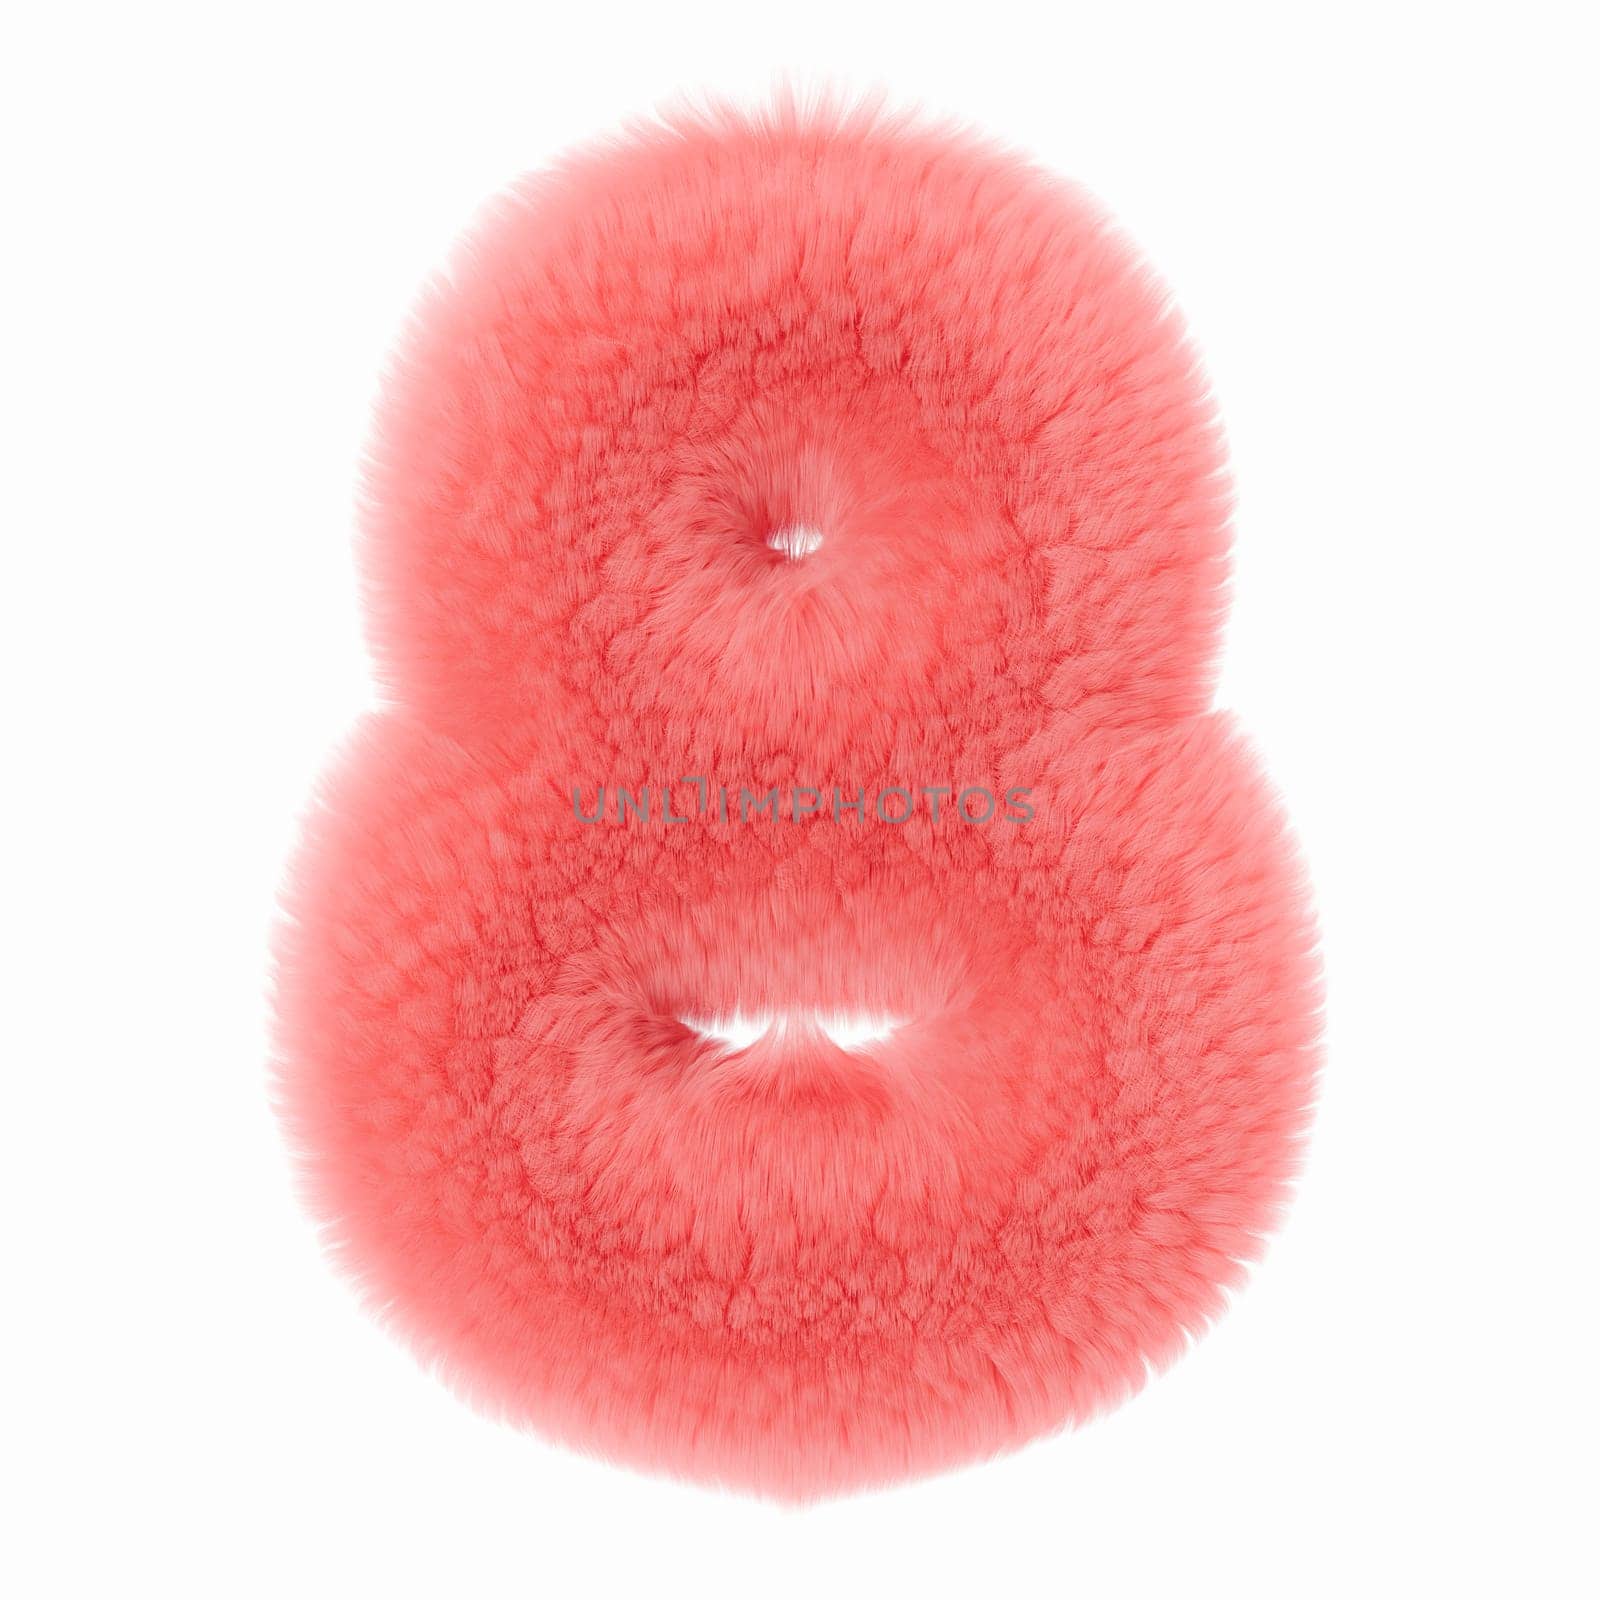 Pink and fluffy 3D number eight, isolated on white background. Furry, soft and hairy symbol 8. Trendy, cute design element. Cut out object. 3D rendering. by creativebird